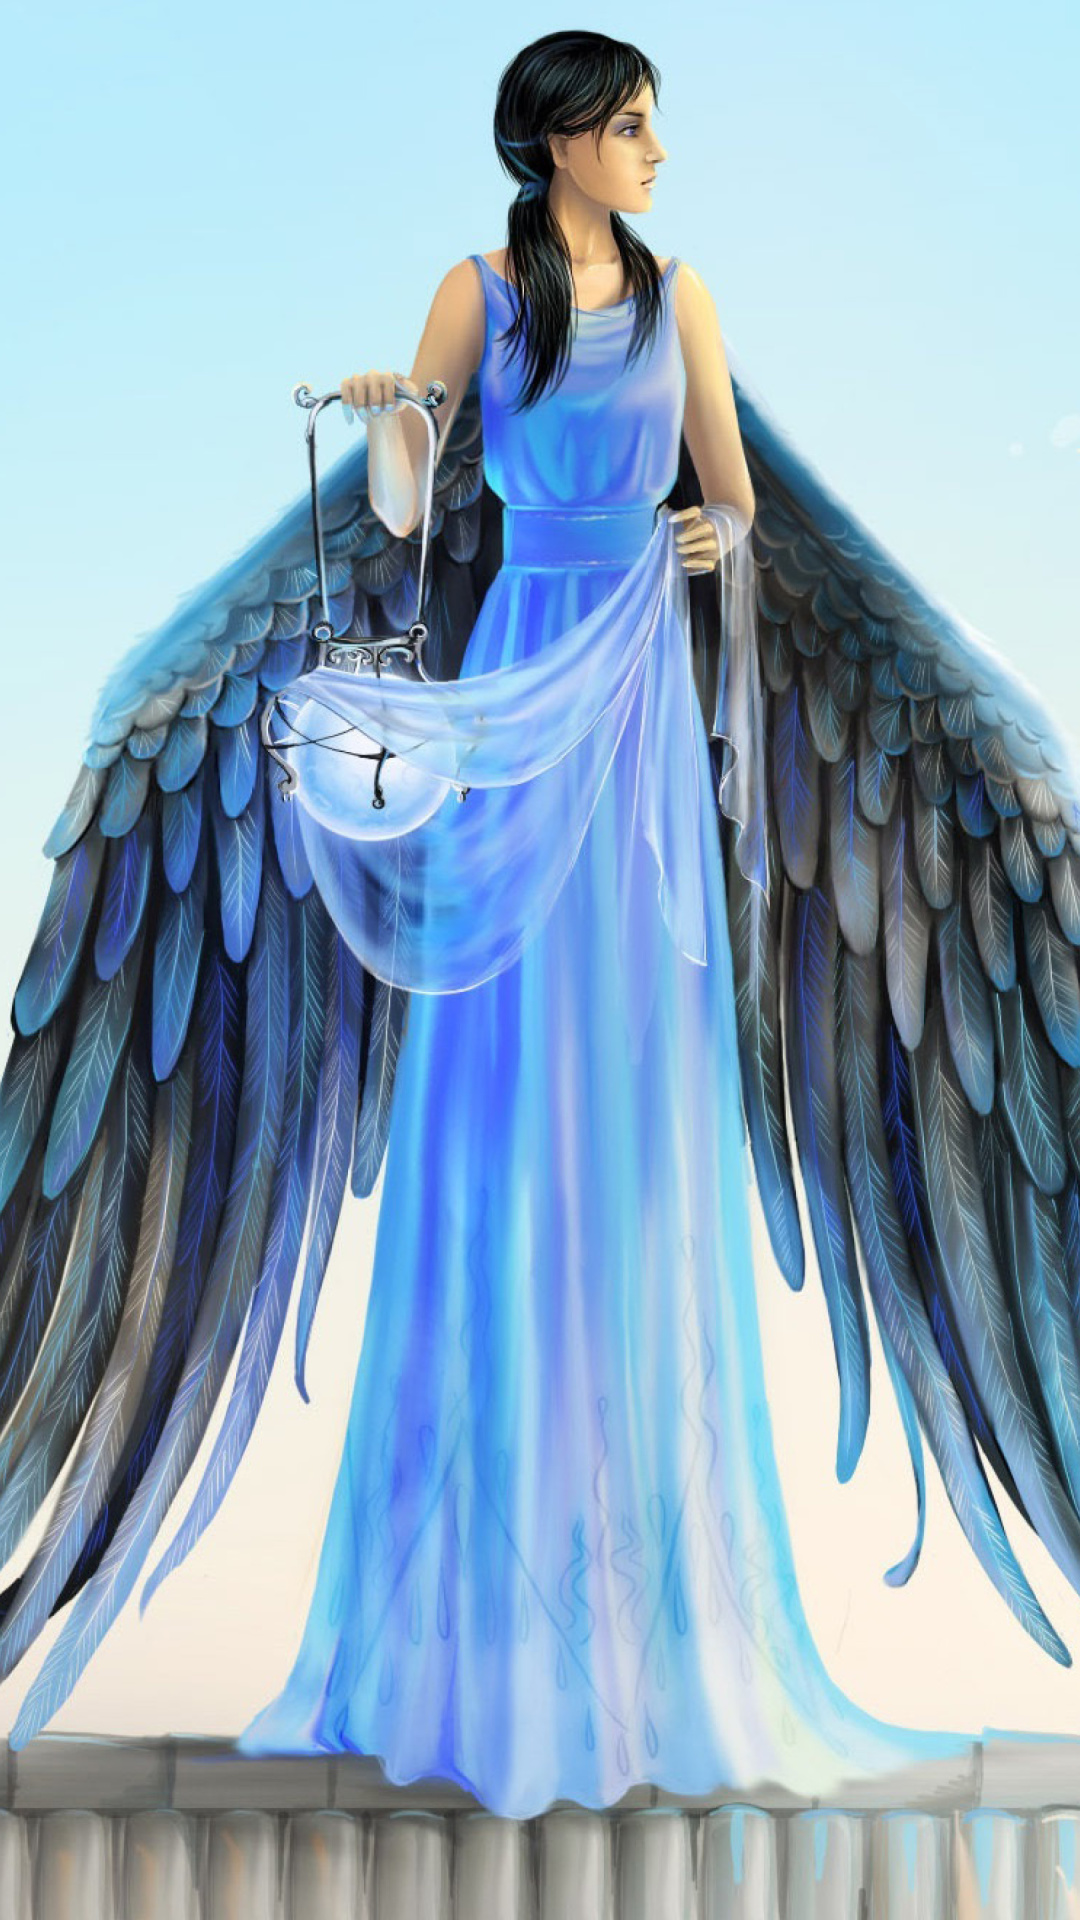 Das Angel with Wings Wallpaper 1080x1920